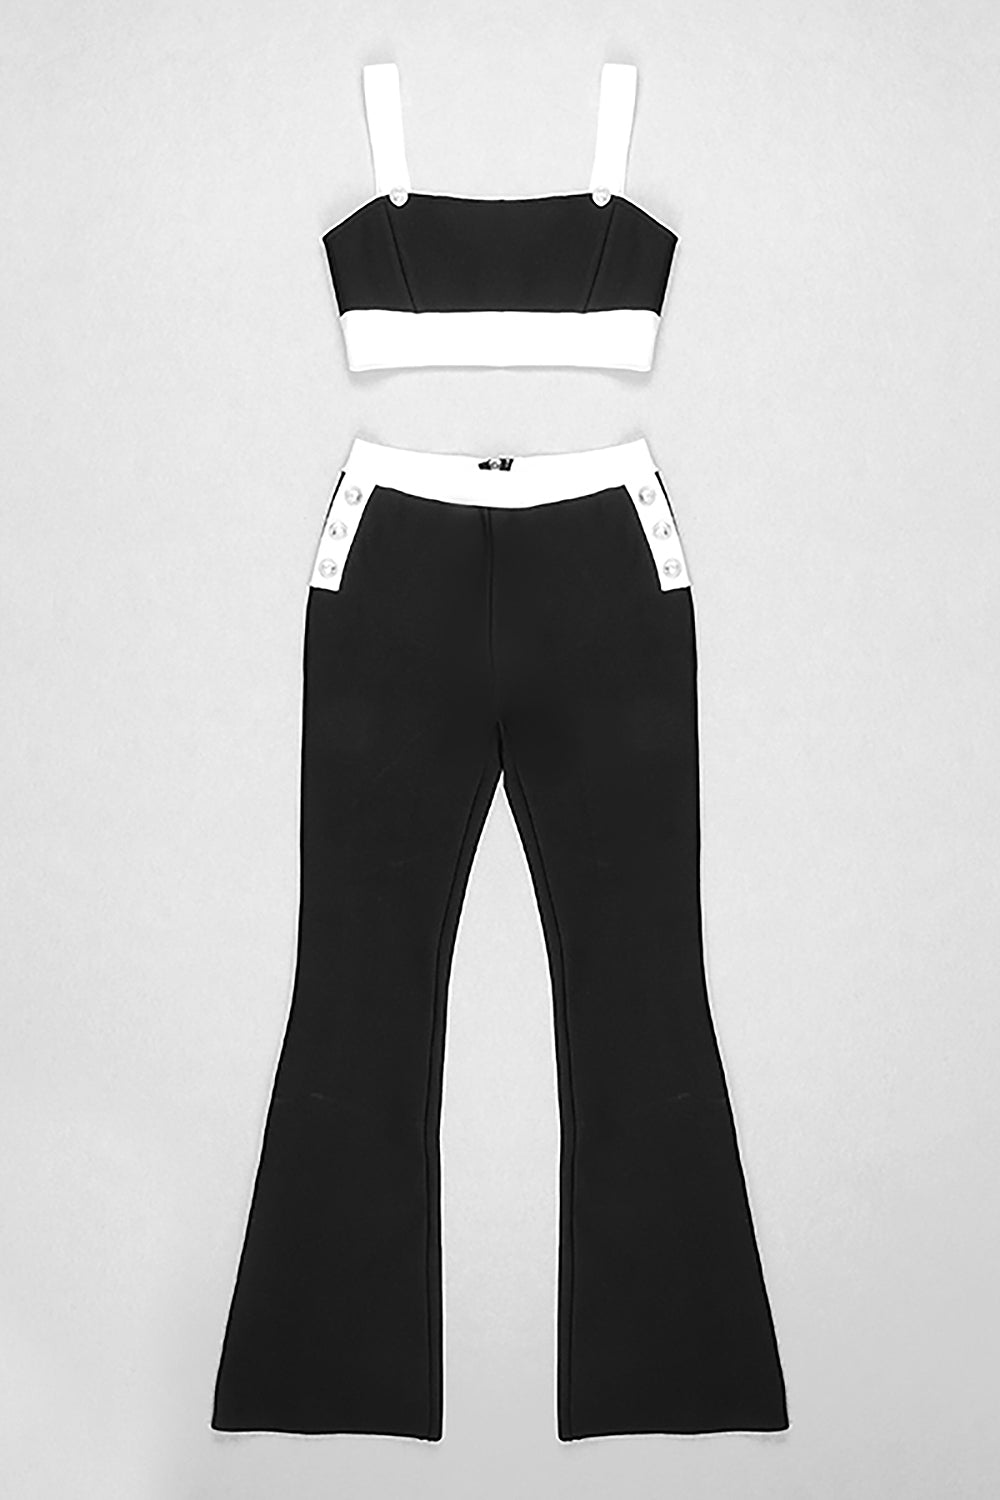 Two Pieces Strappy Sleeveless Bustiers & Long Bell-Bottoms Trousers